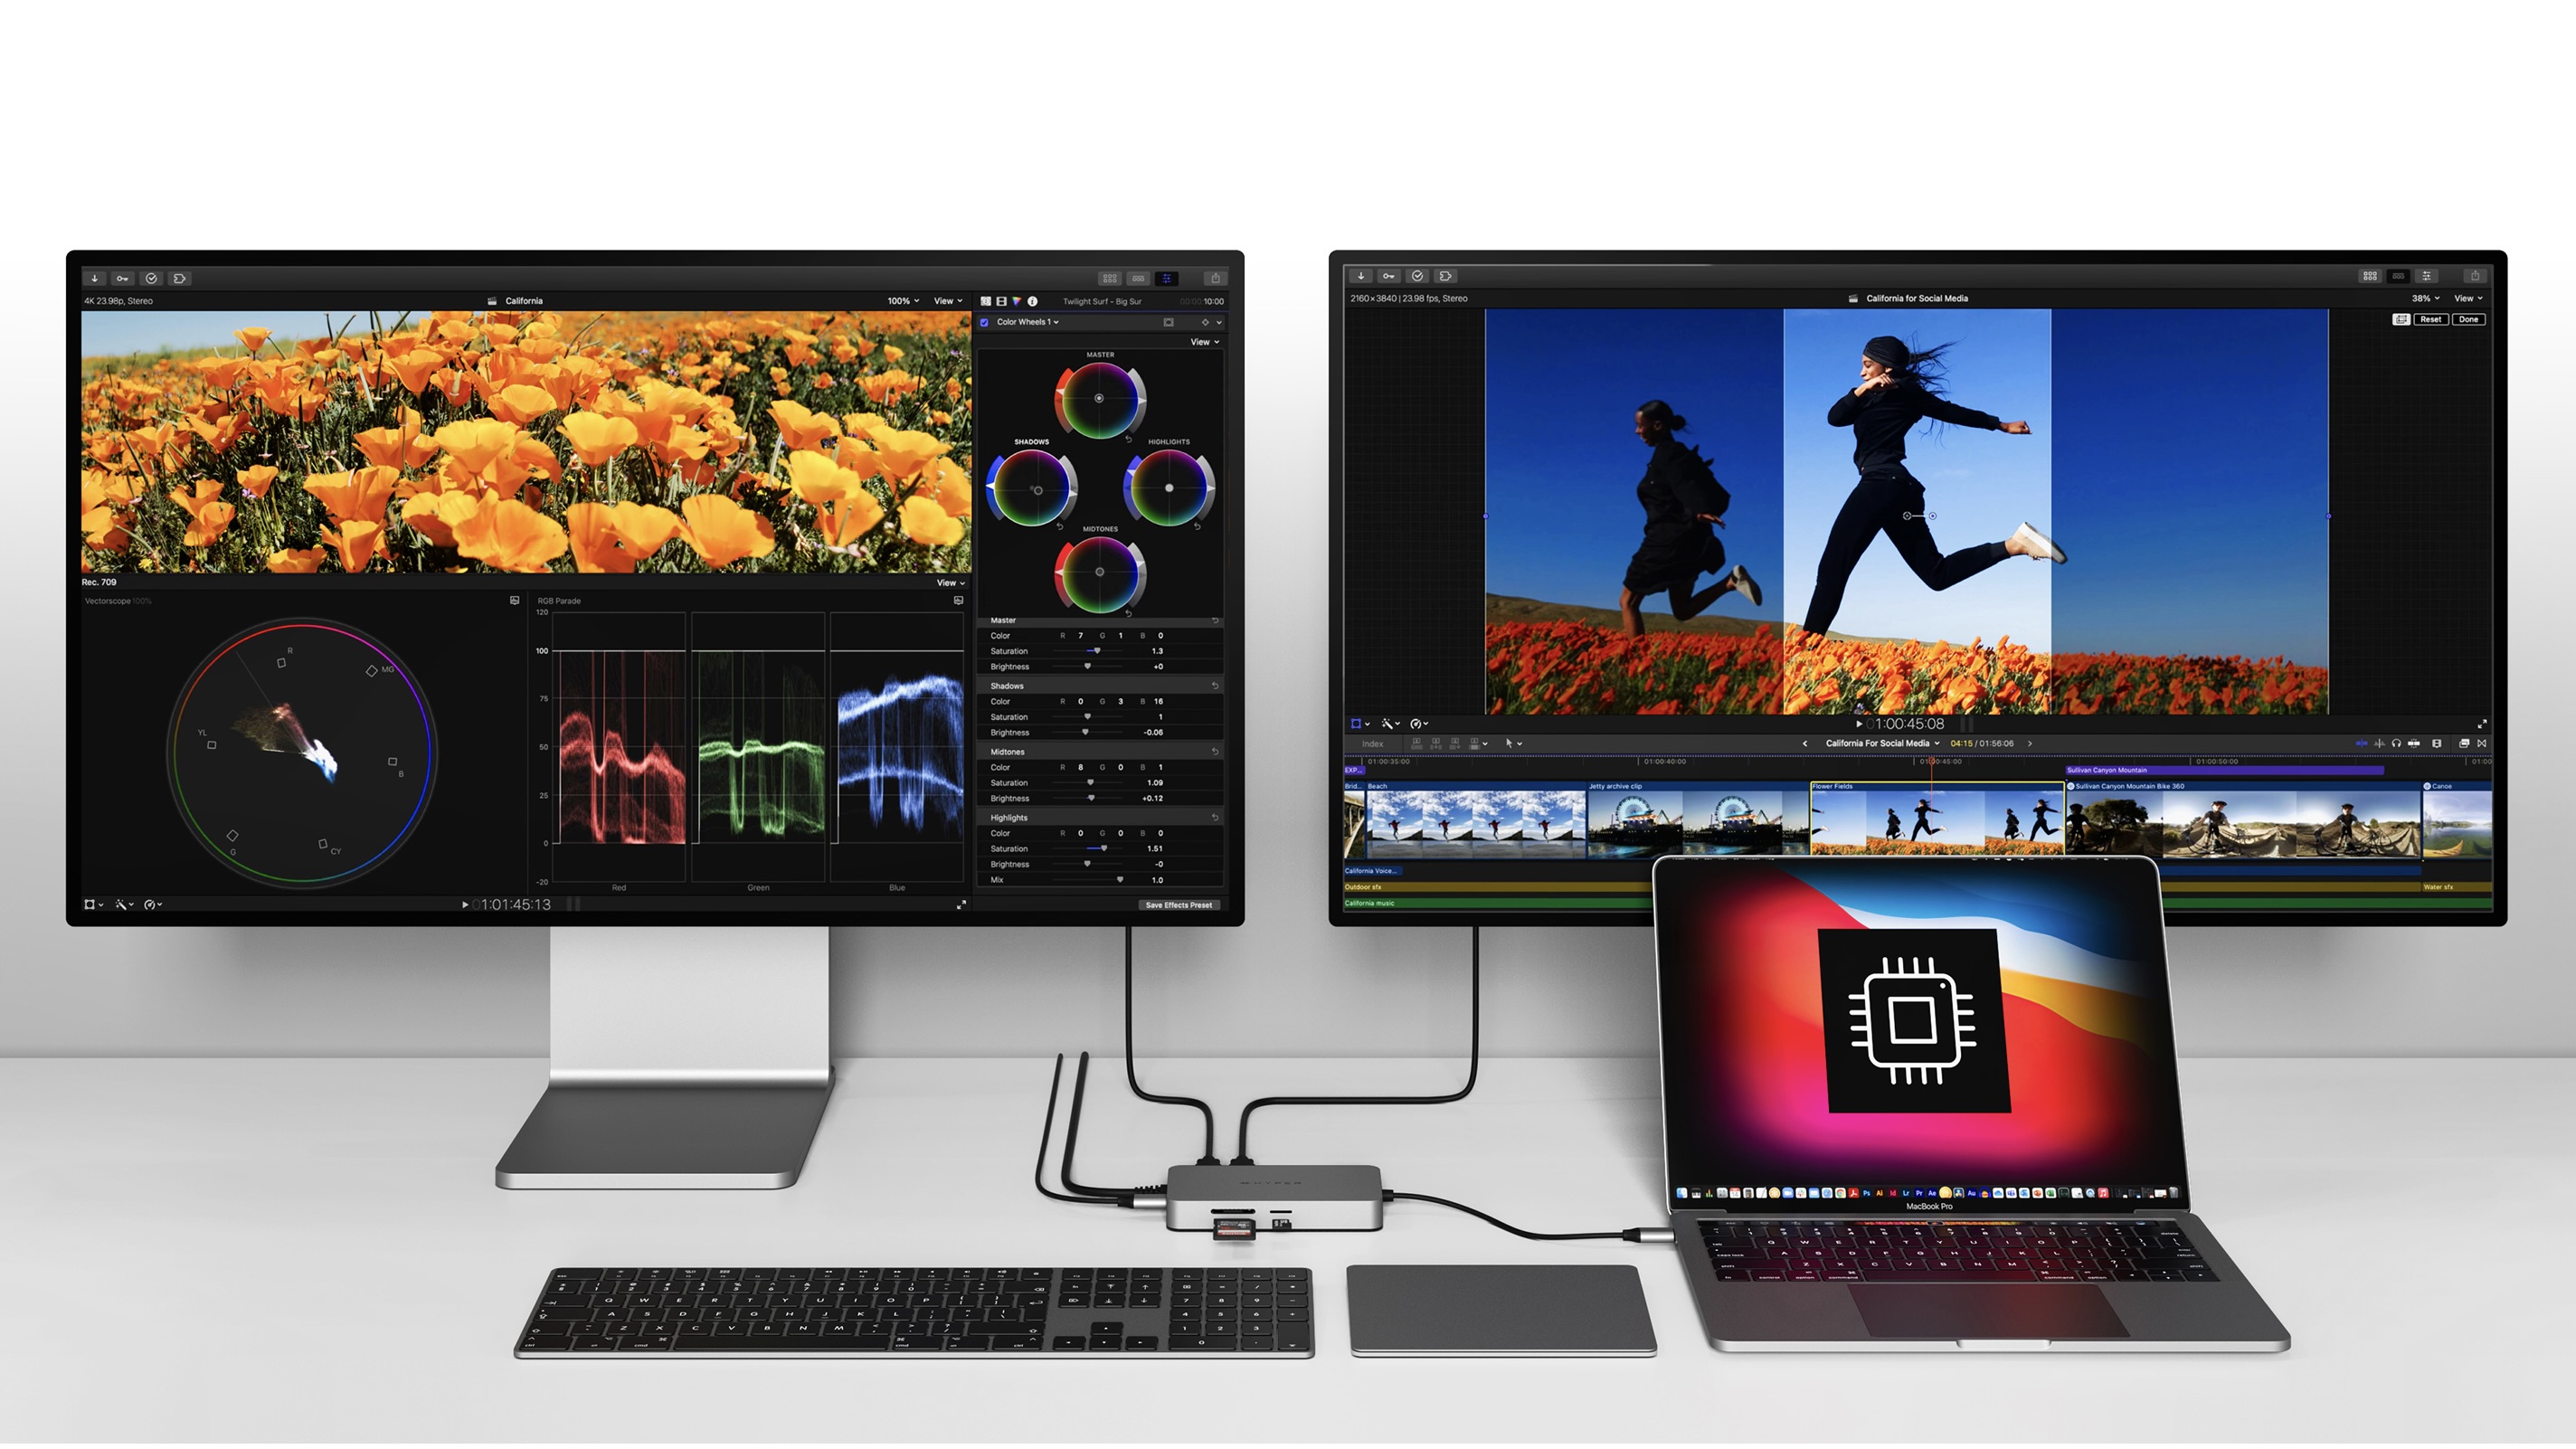 Horn gallop truth Hyper unveils new 'Dual 4K HDMI' dongles for using multiple external  displays with M1 Macs - 9to5Mac